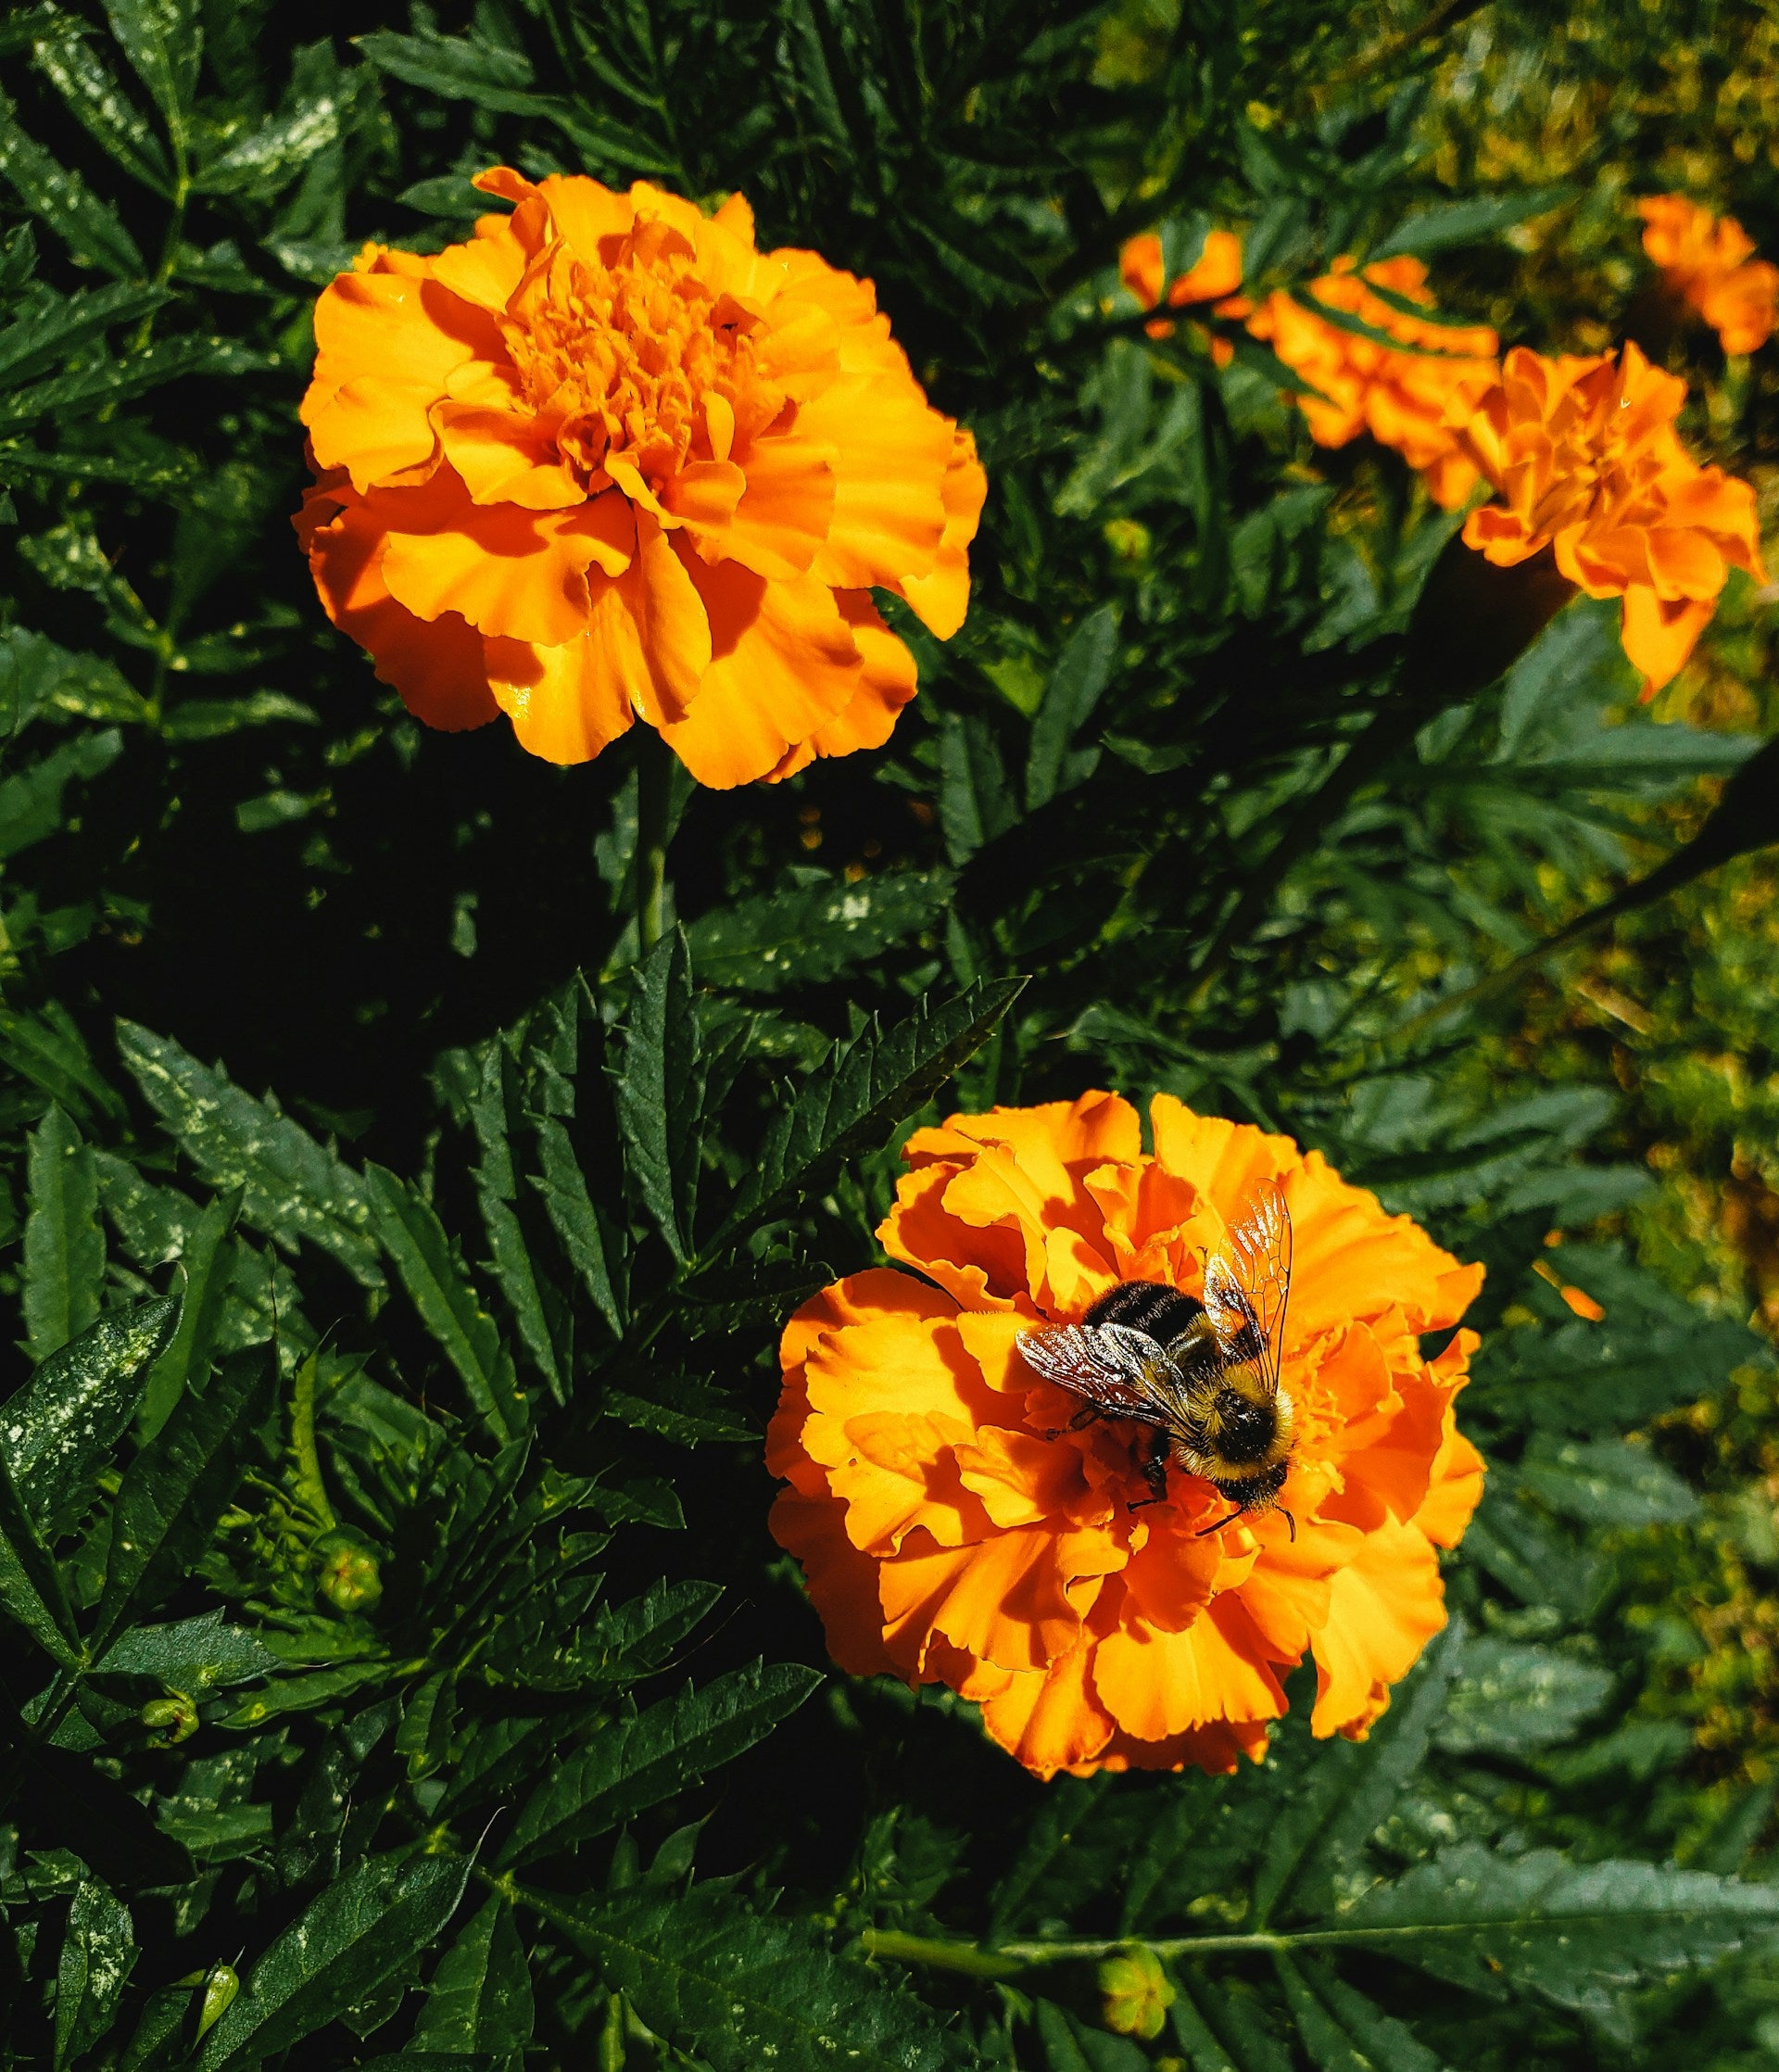 Three brilliantly orange-yellow marigolds with a bee pollinating one of them